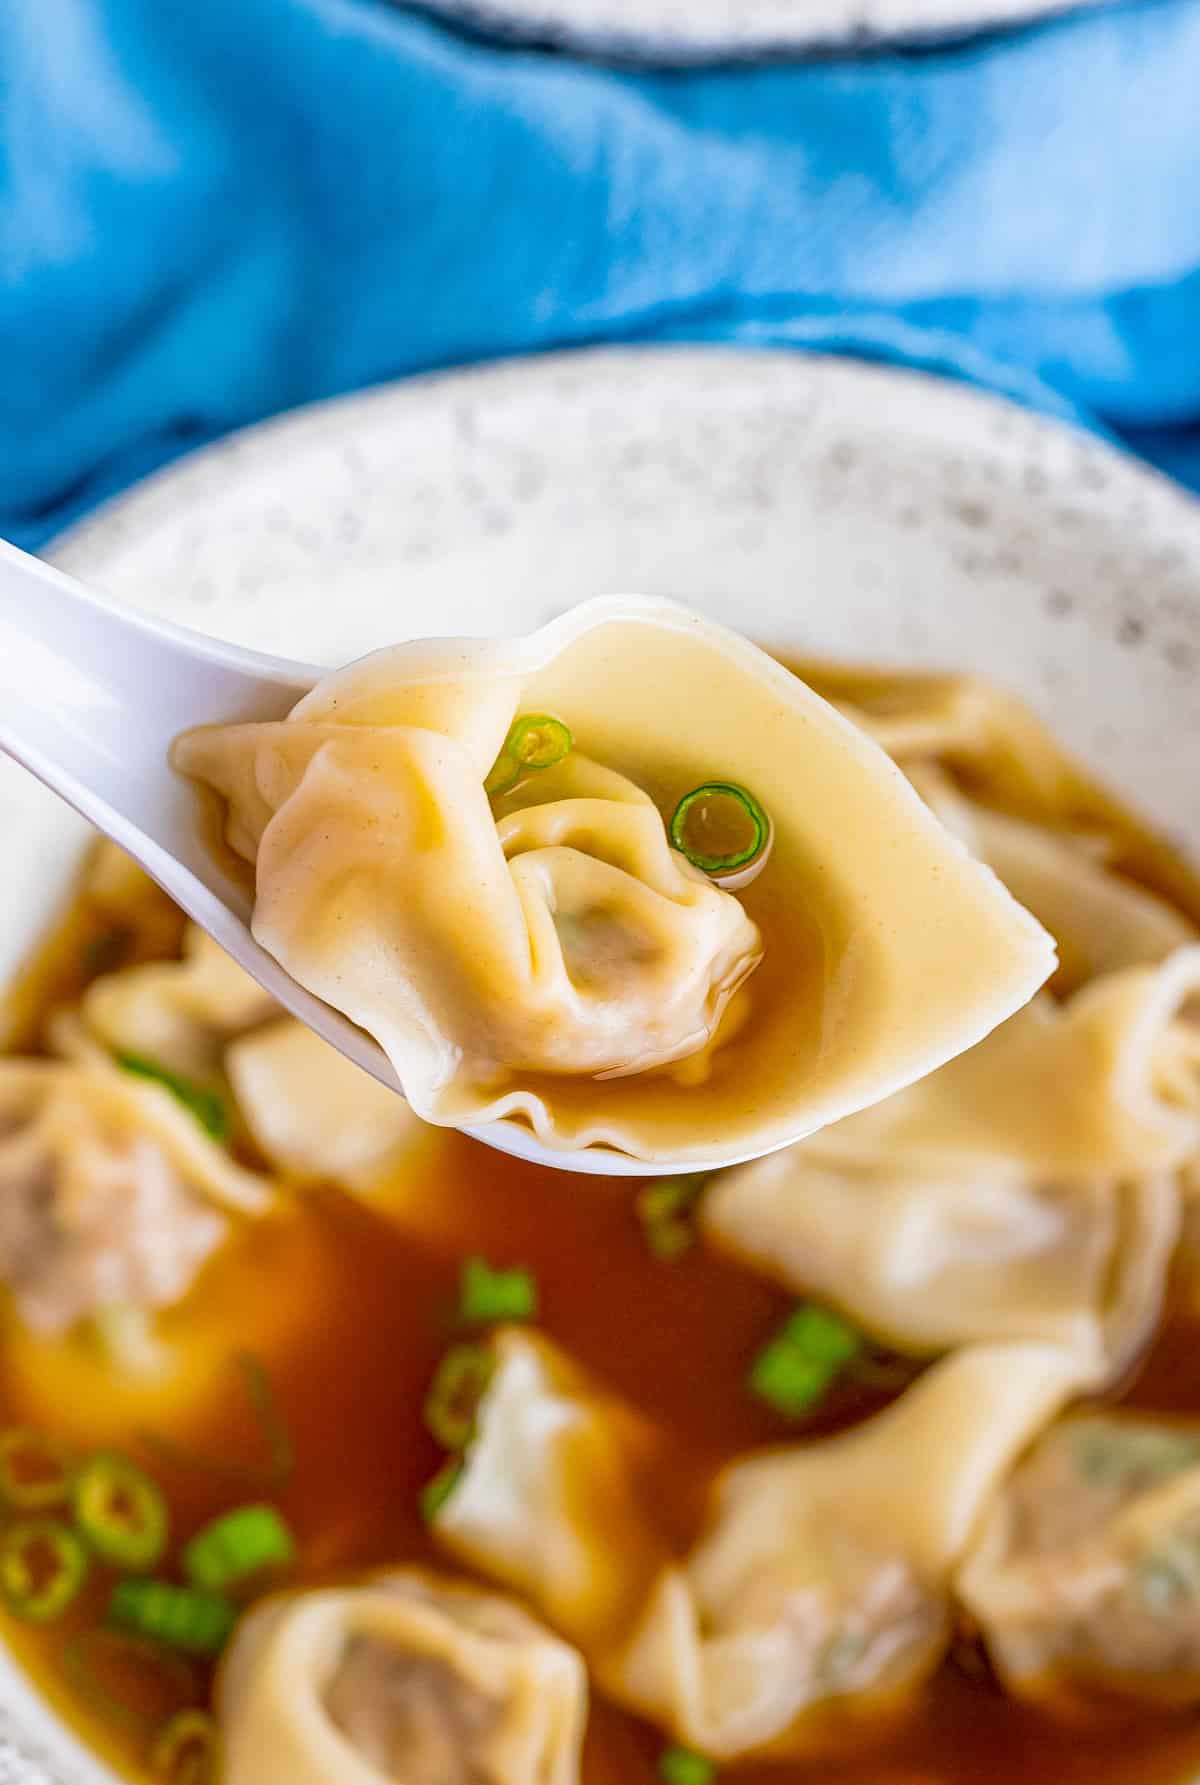 Spoon holding up one wonton from soup bowl with broth and green onions.